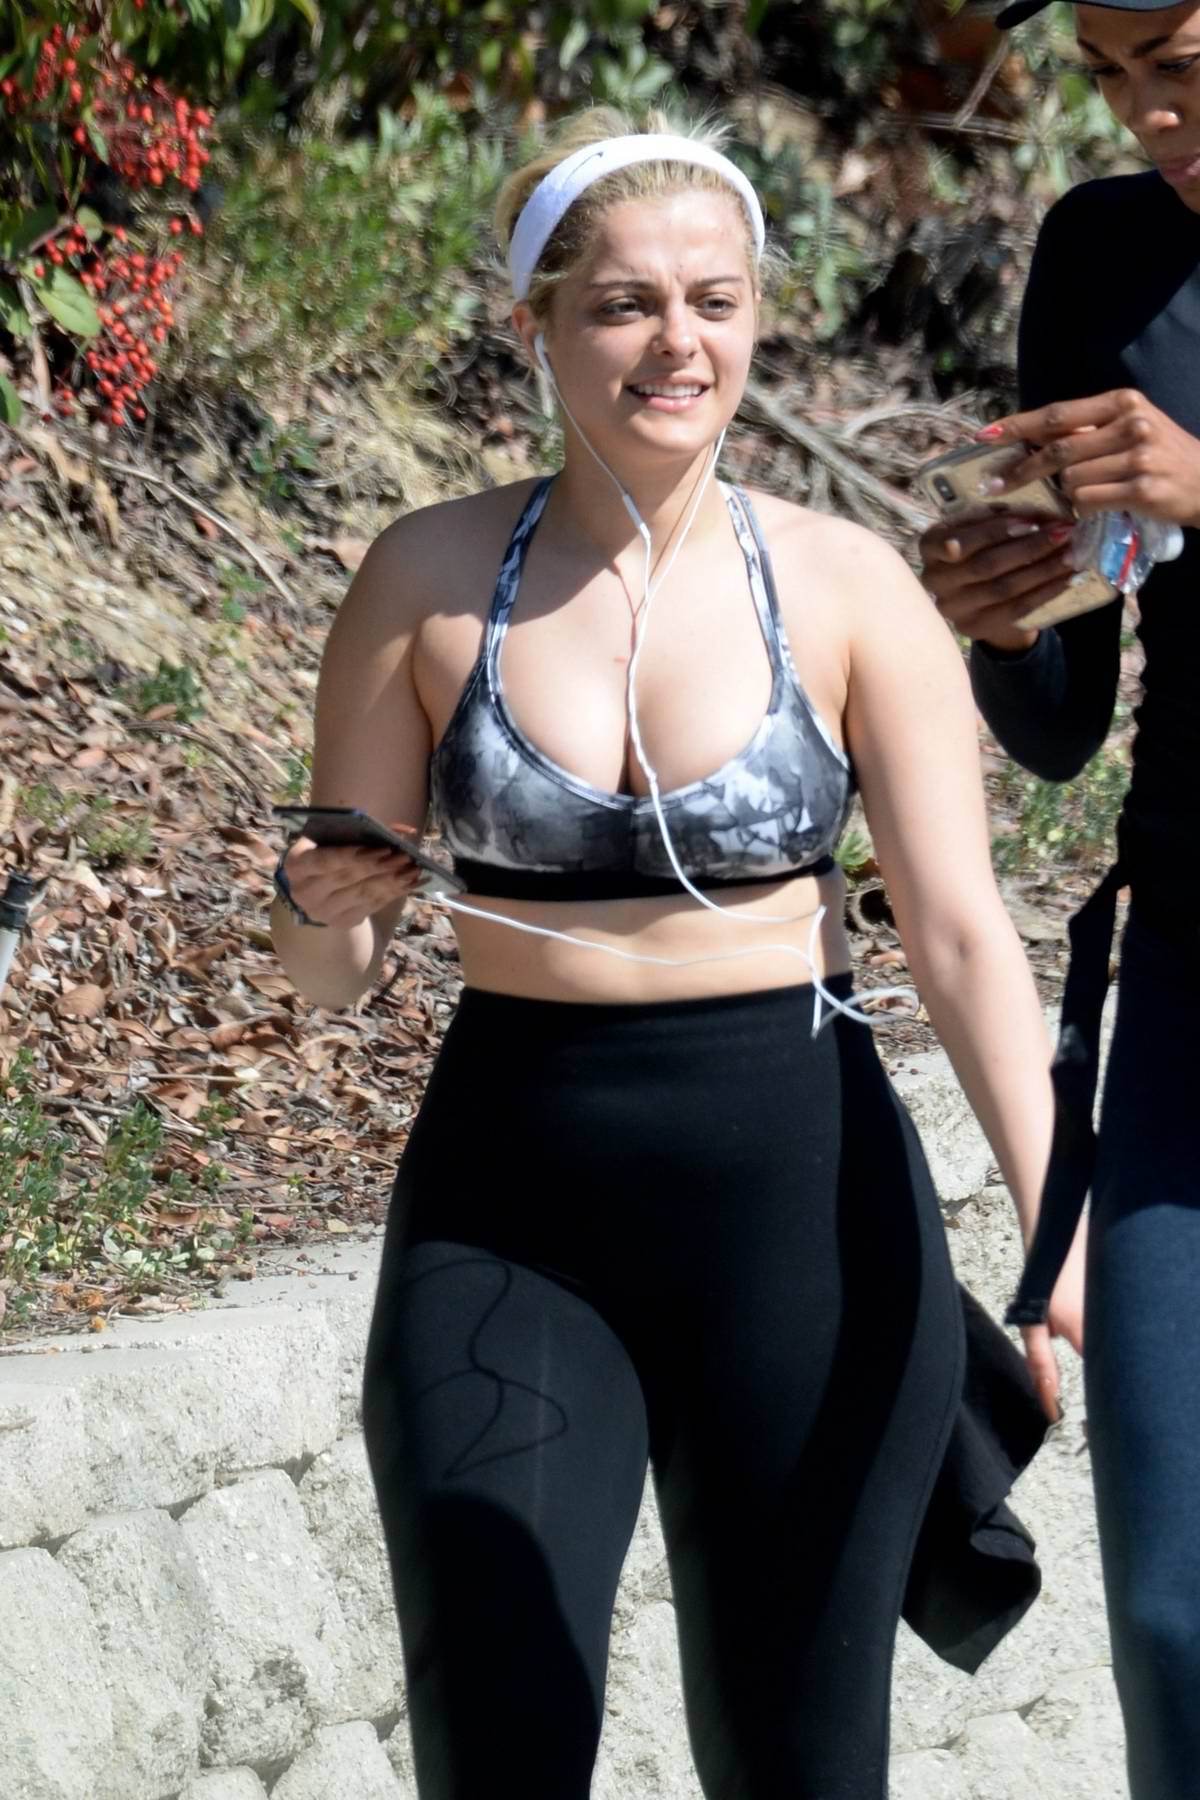 Bebe Rexha Spotted Working Out In A Bra And Leggings